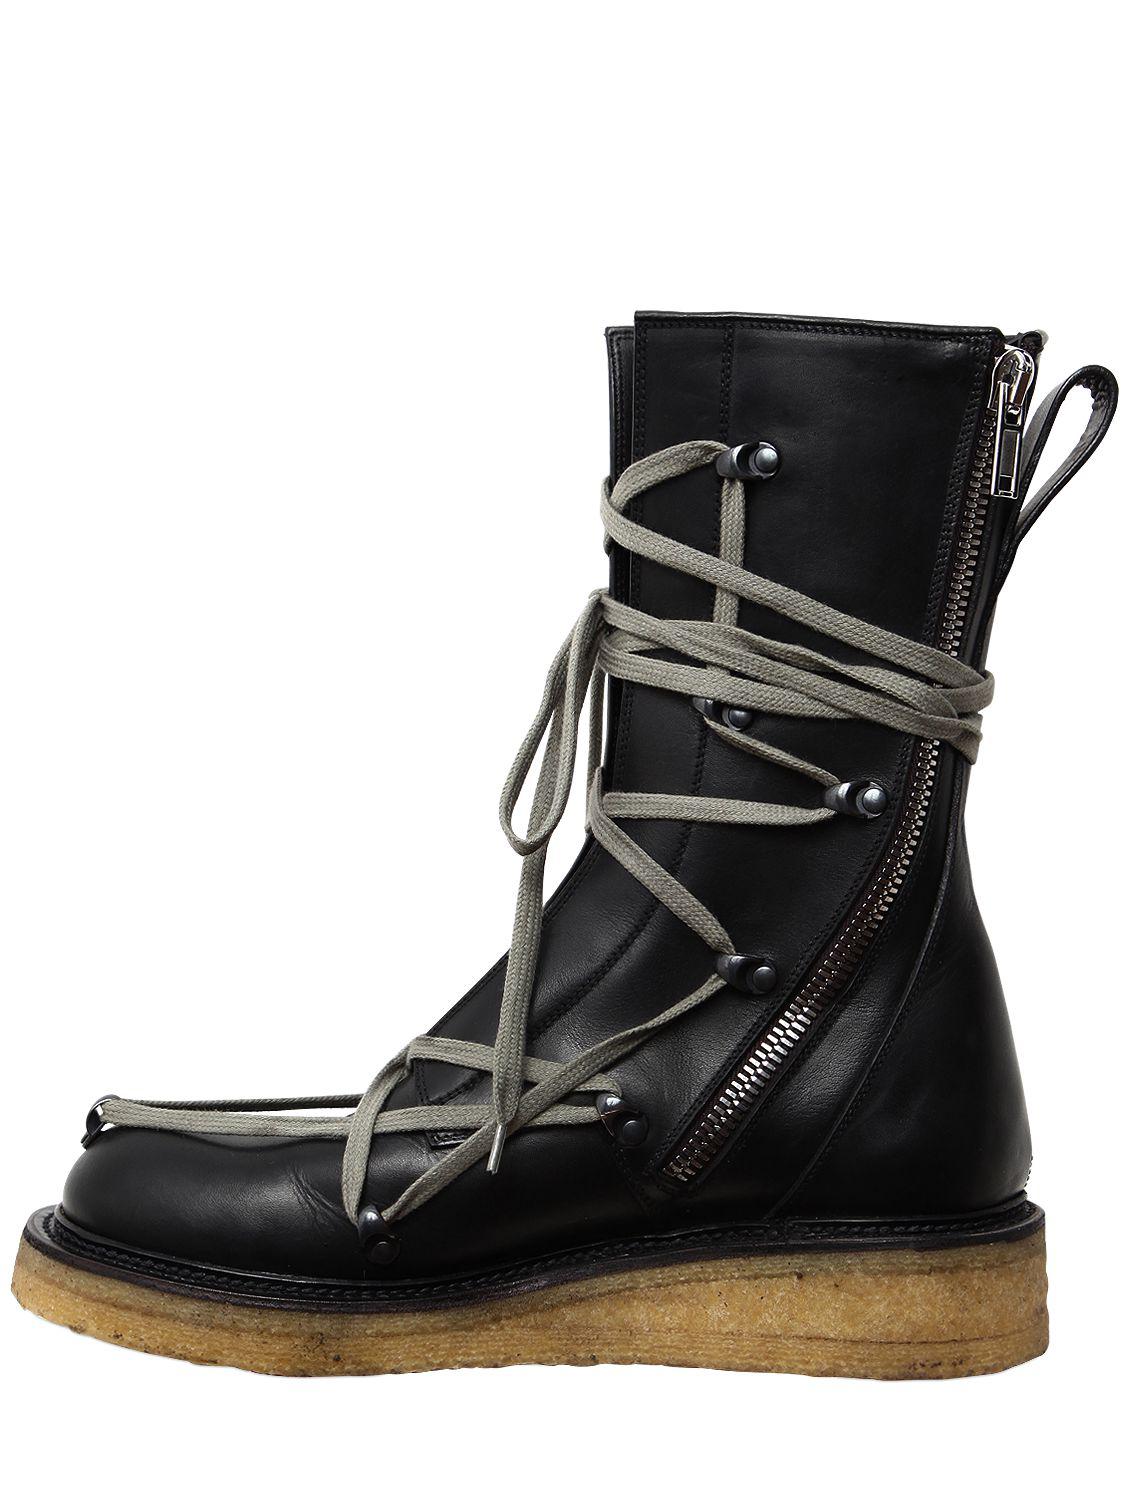 Lyst - Rick Owens 30mm Lace Up Creeper Leather Boots in Black